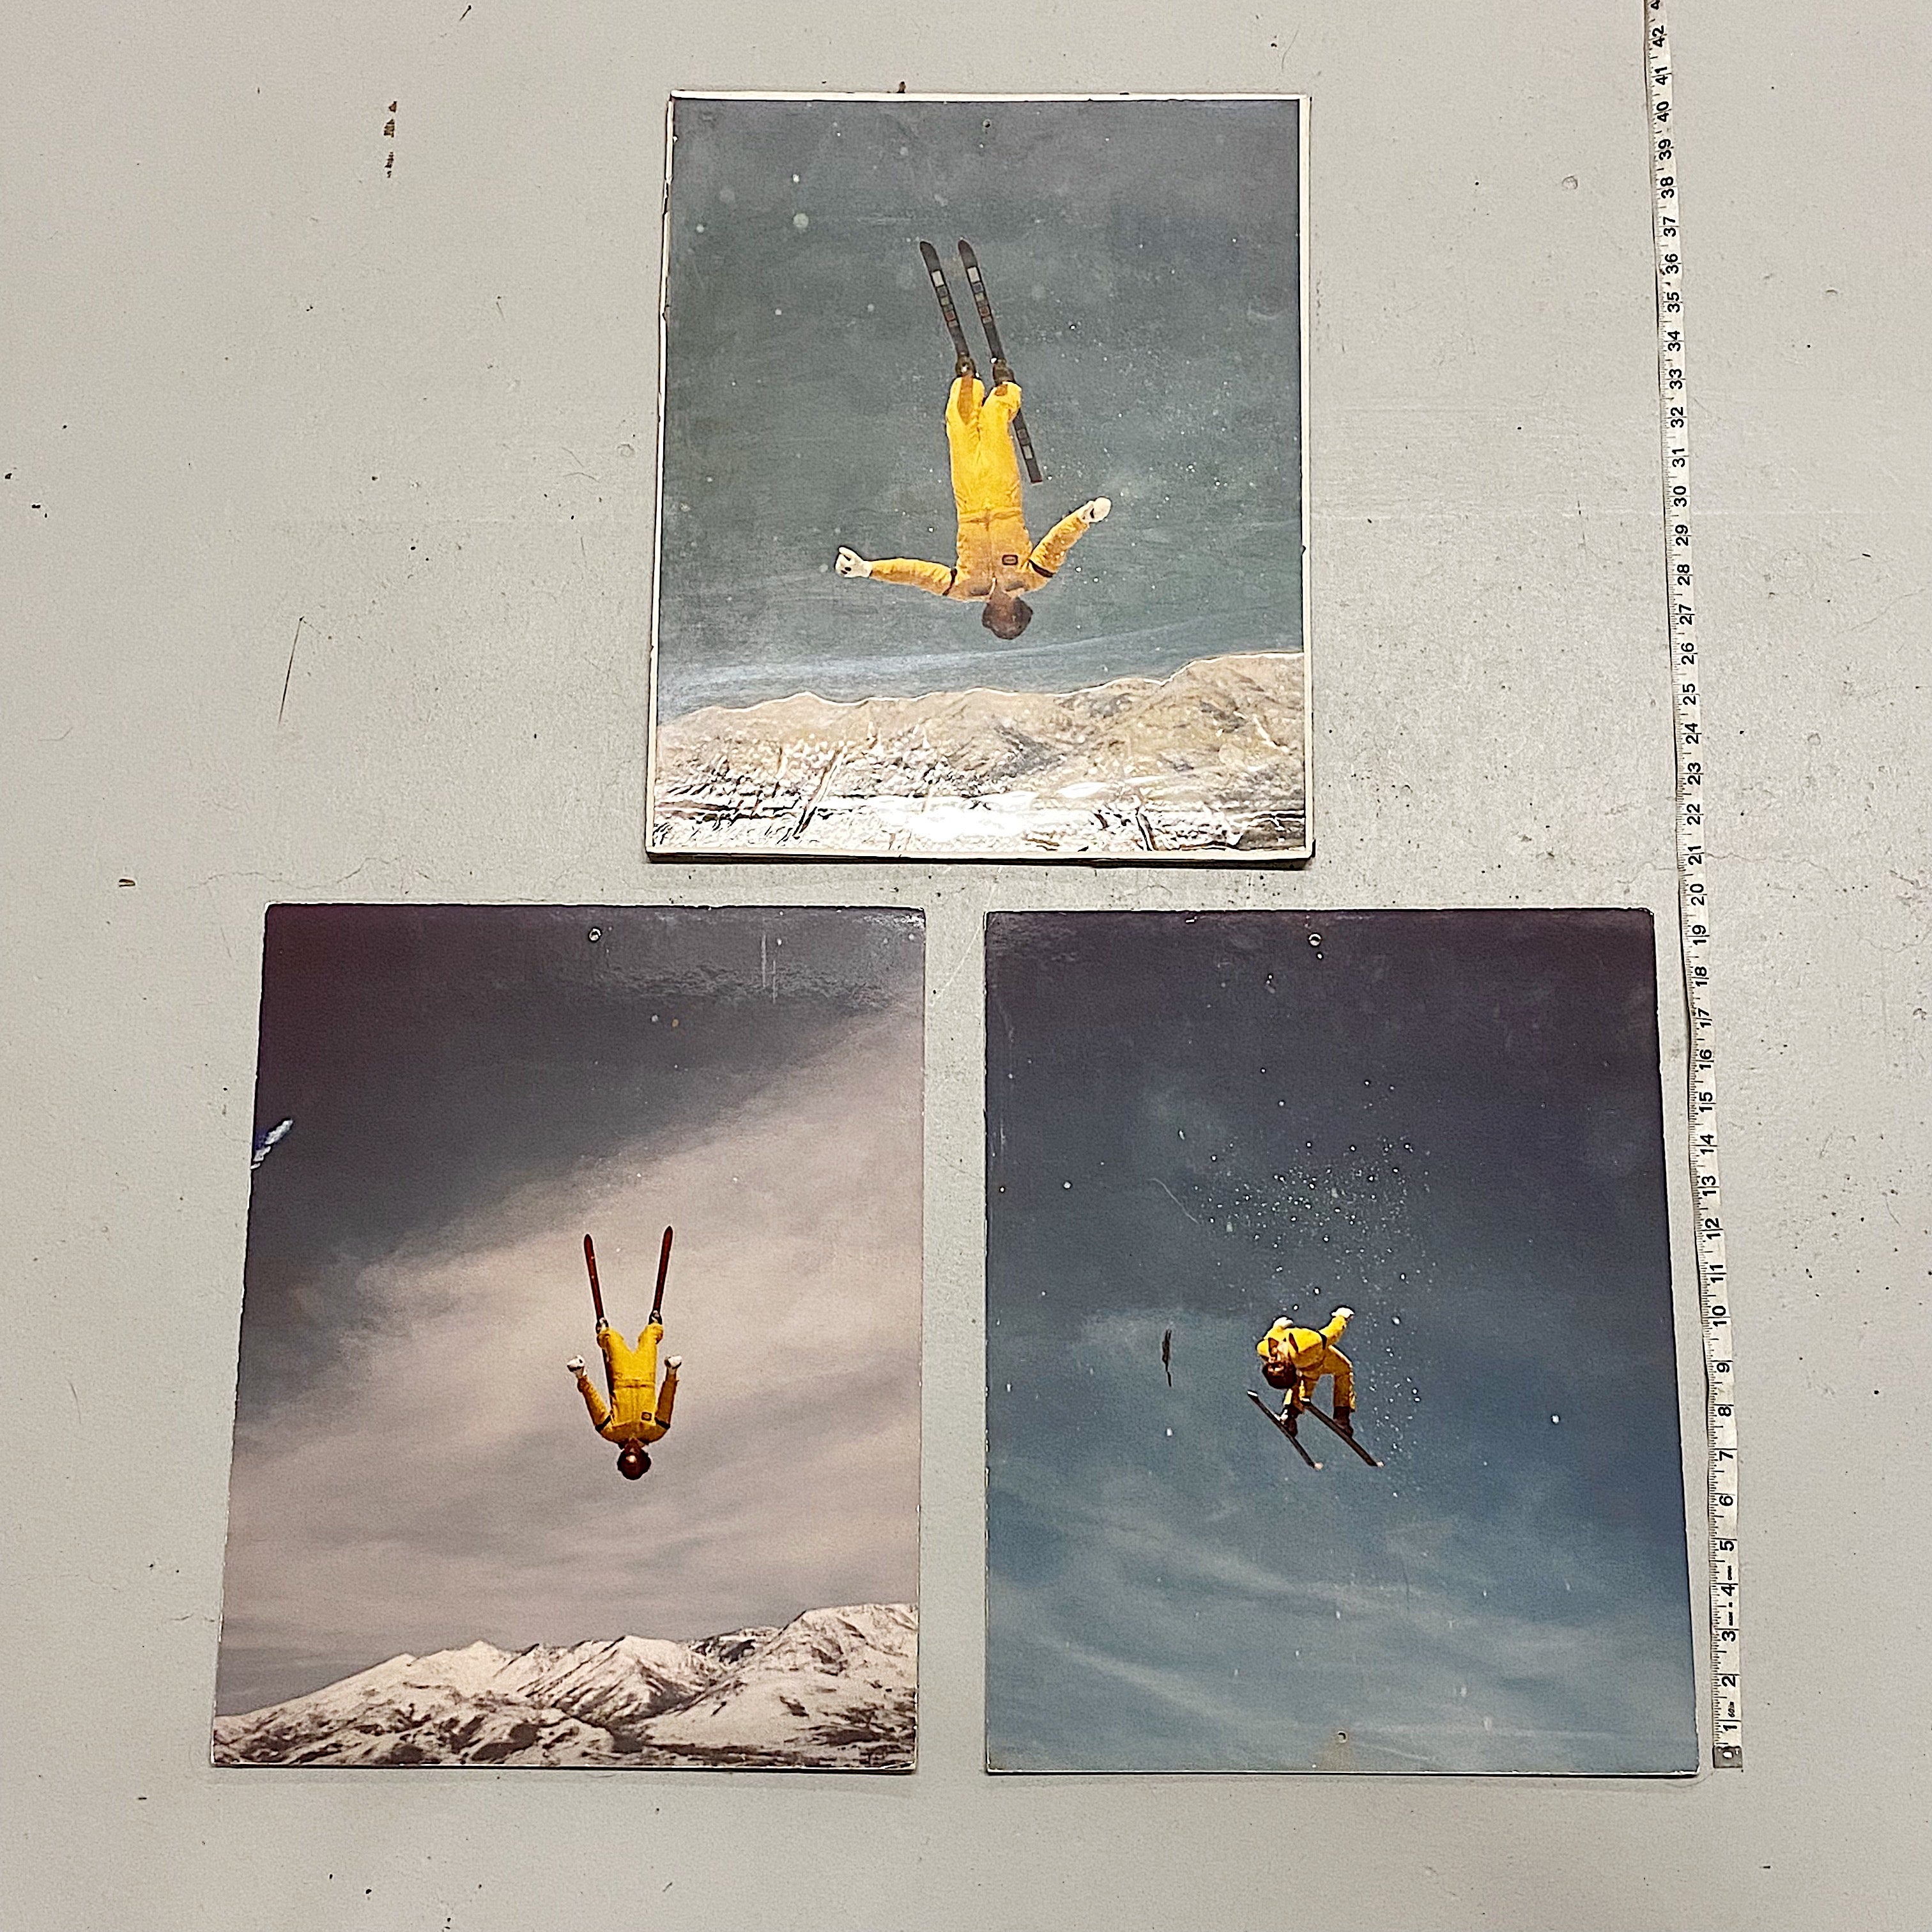 Rare Vintage Freestyle Skiing Archive Featuring Frank Beddor - Rare 1980s Photo and Poster Ski Collectibles - World Pro Am Aerial Championship